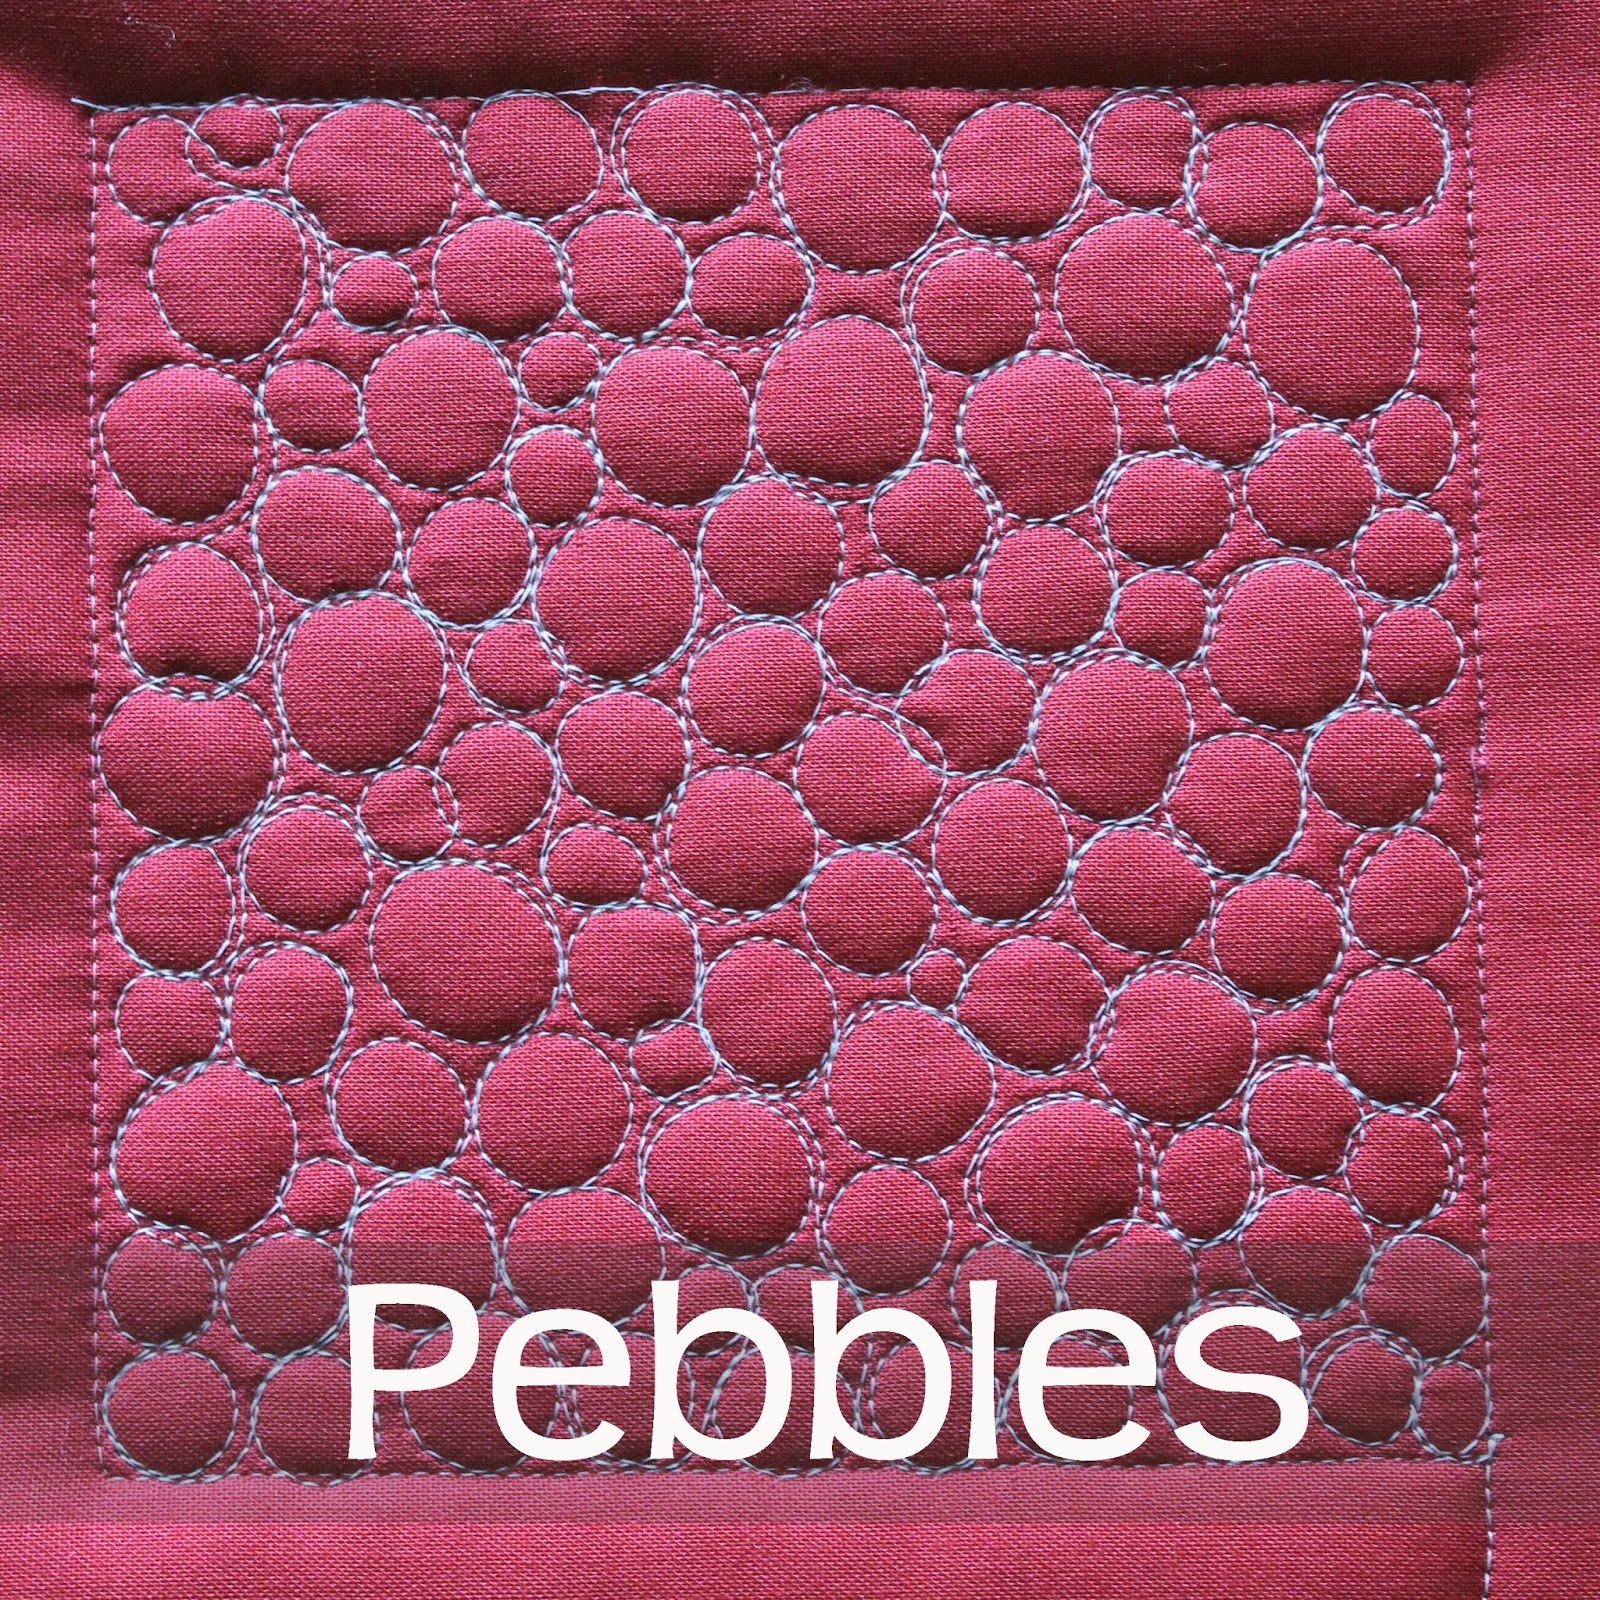 How-to Machine Quilt Pebbles - A Video Tutorial